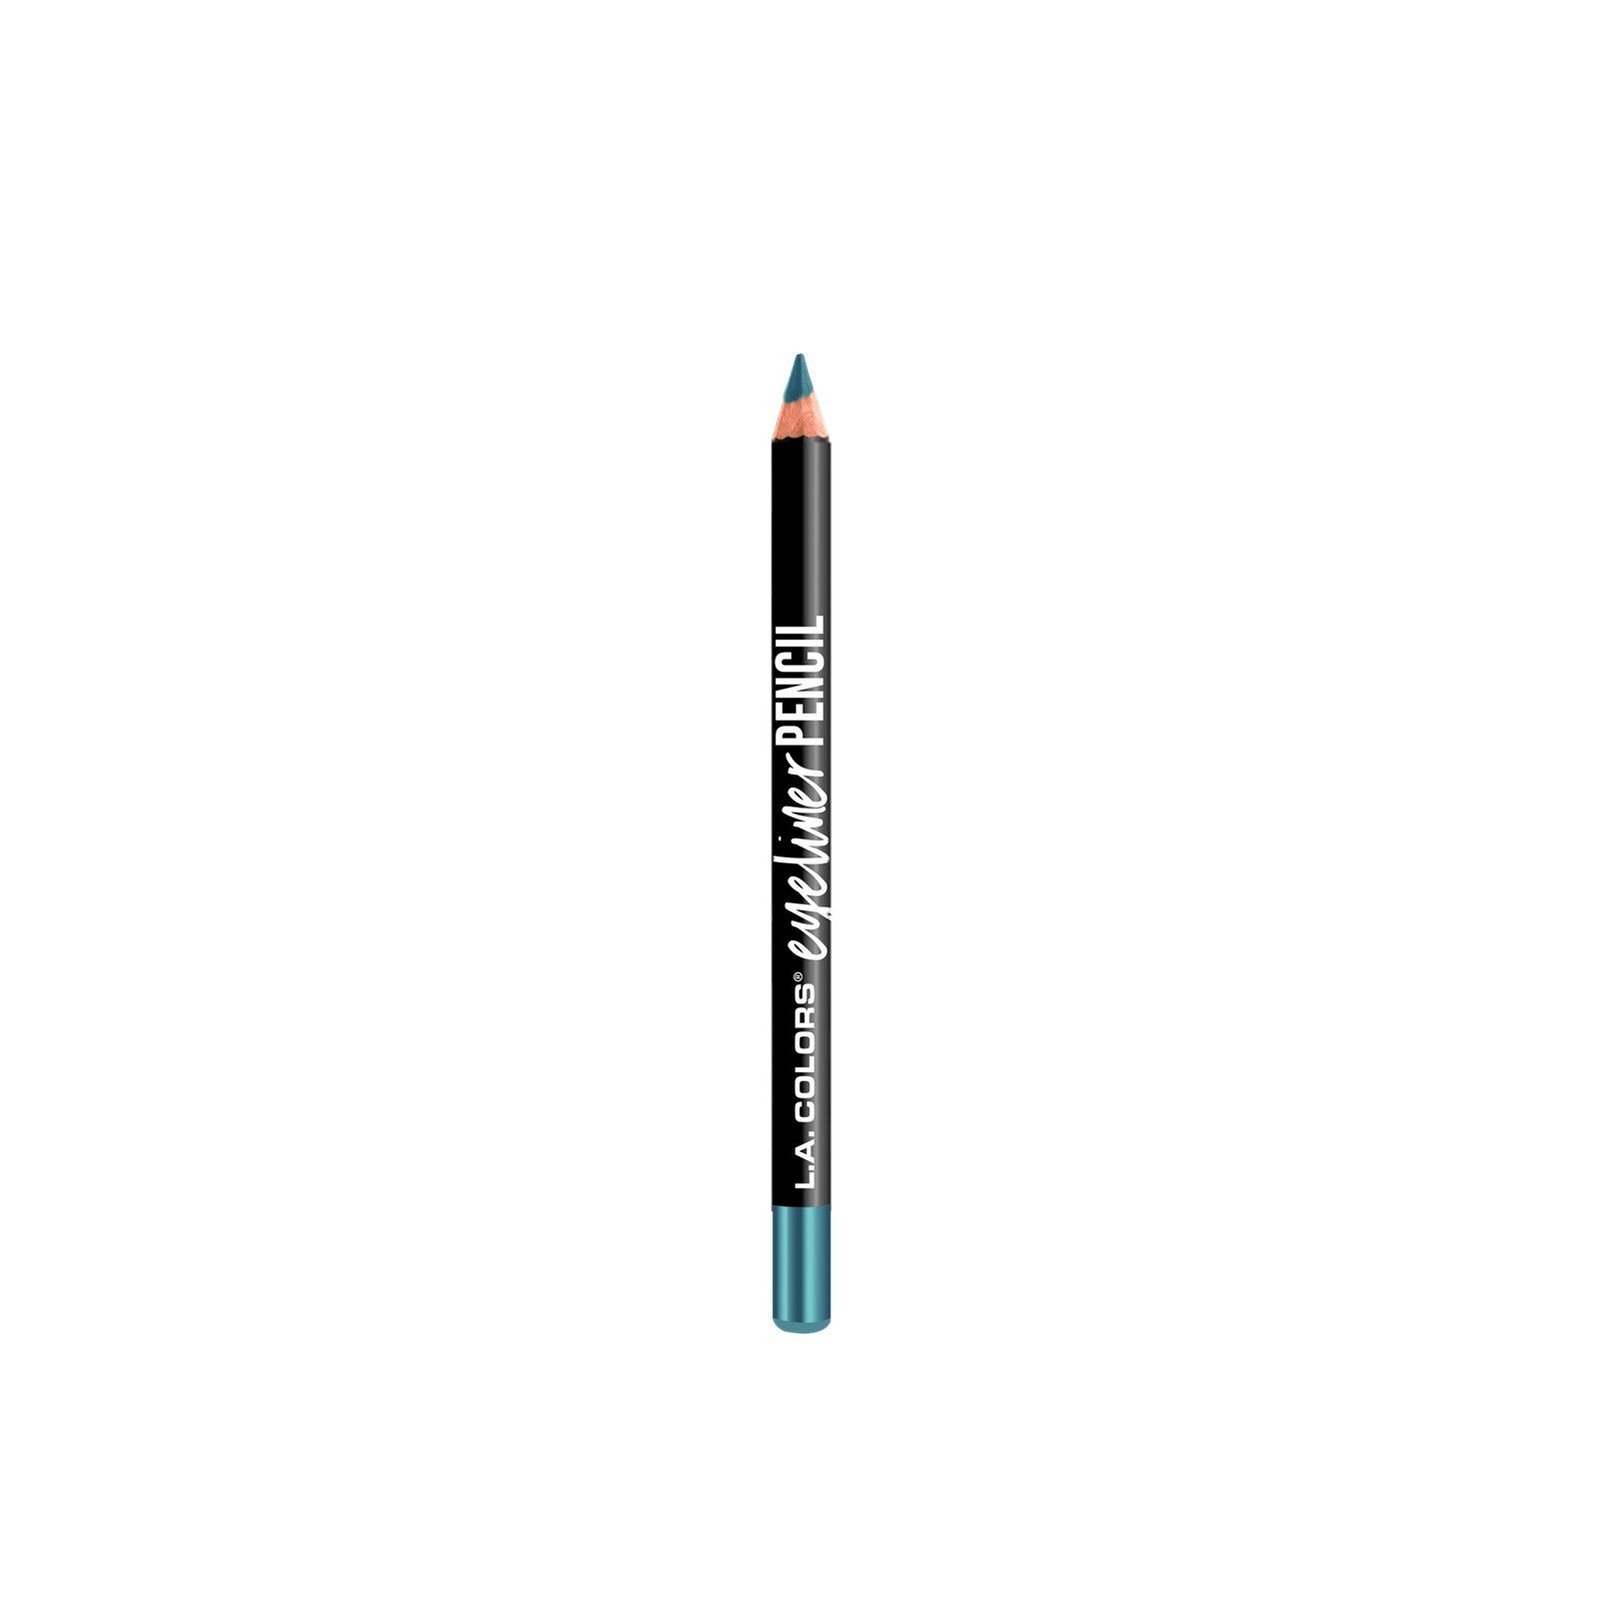 L.A. Colors Eyeliner Pencil CP616A Turquoise 1g (0.035 oz)